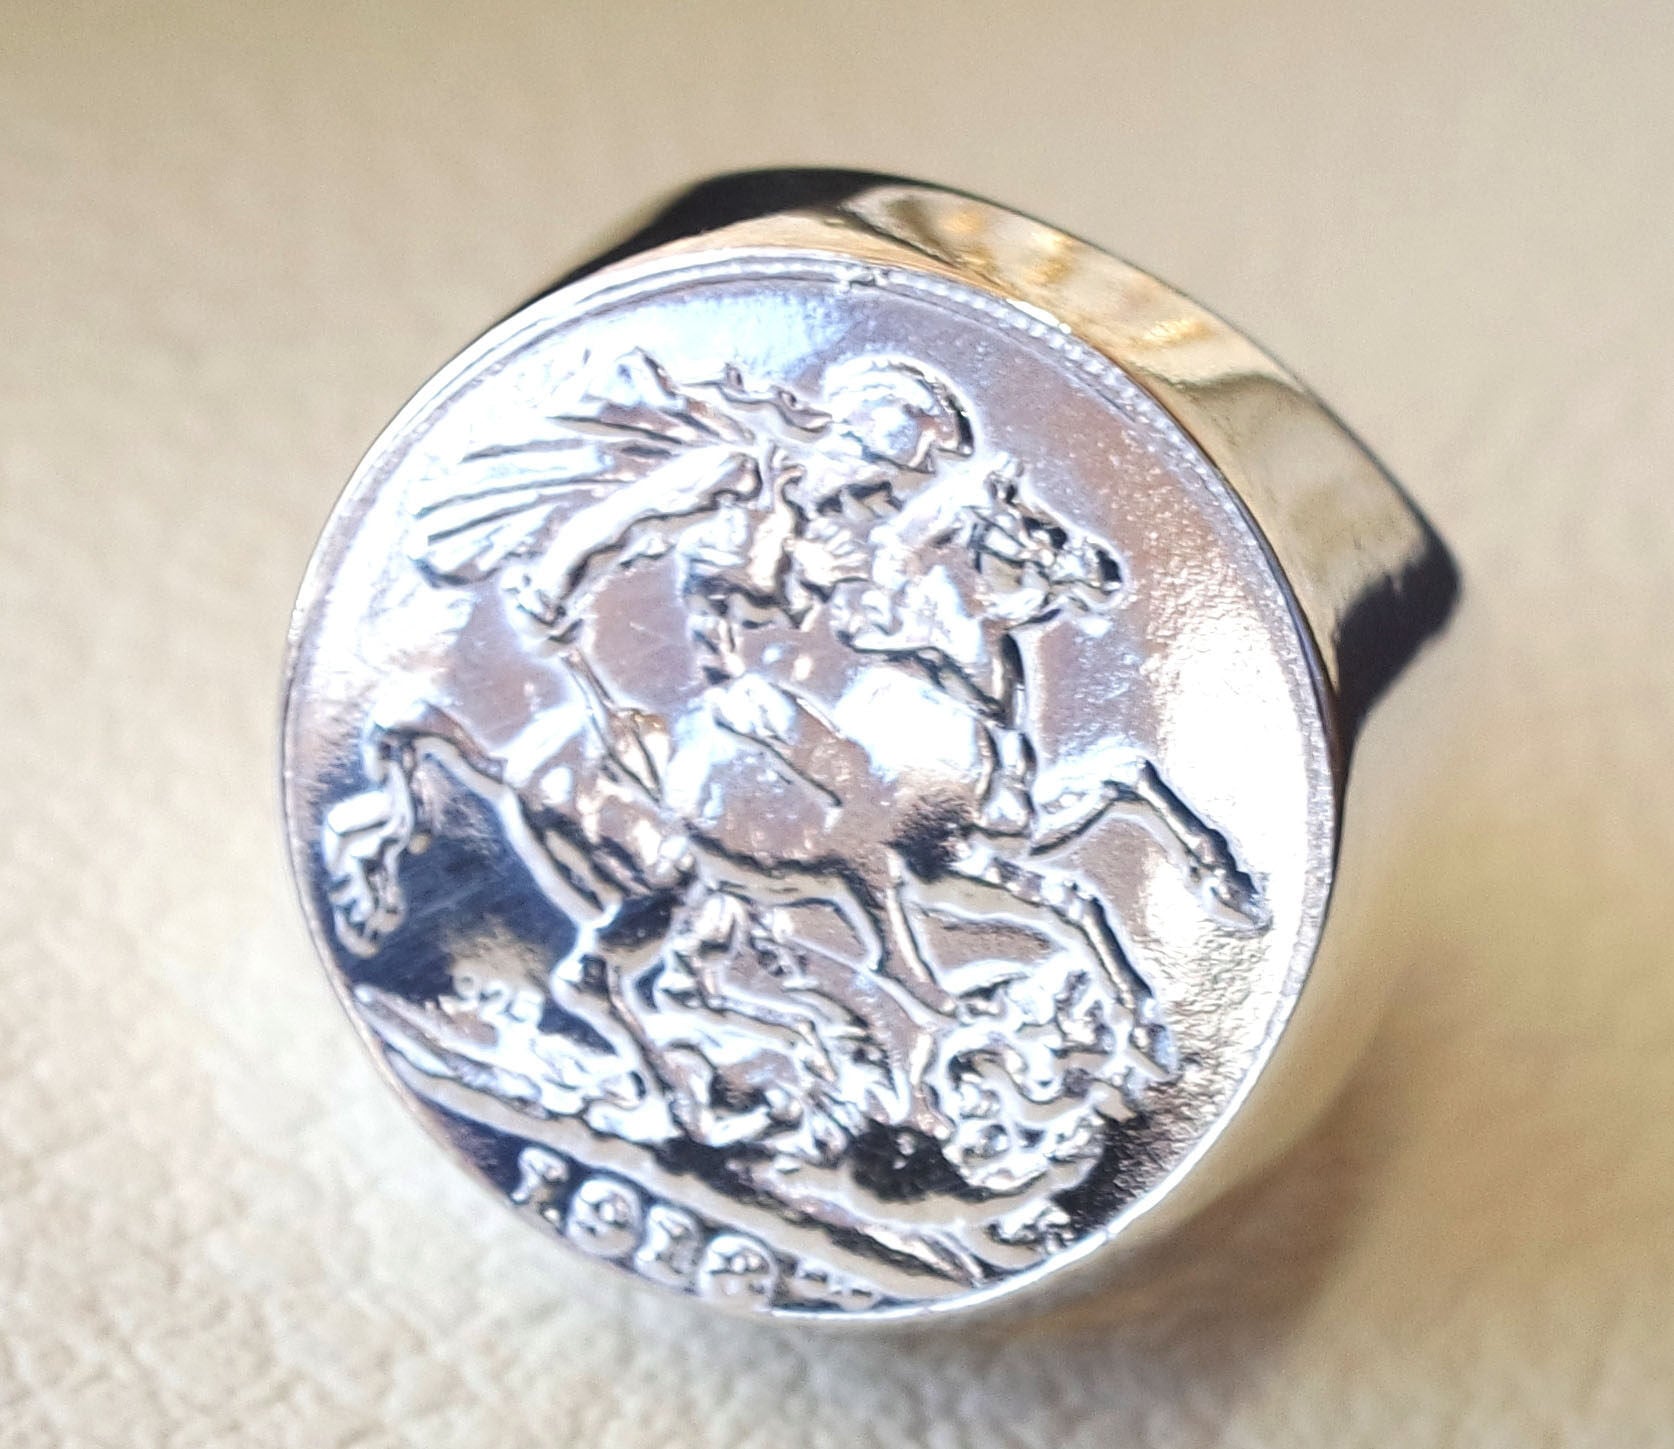 English silver coin heavy man ring round sterling silver 925 historical British replica full coin size close back huge all sizes jewelry